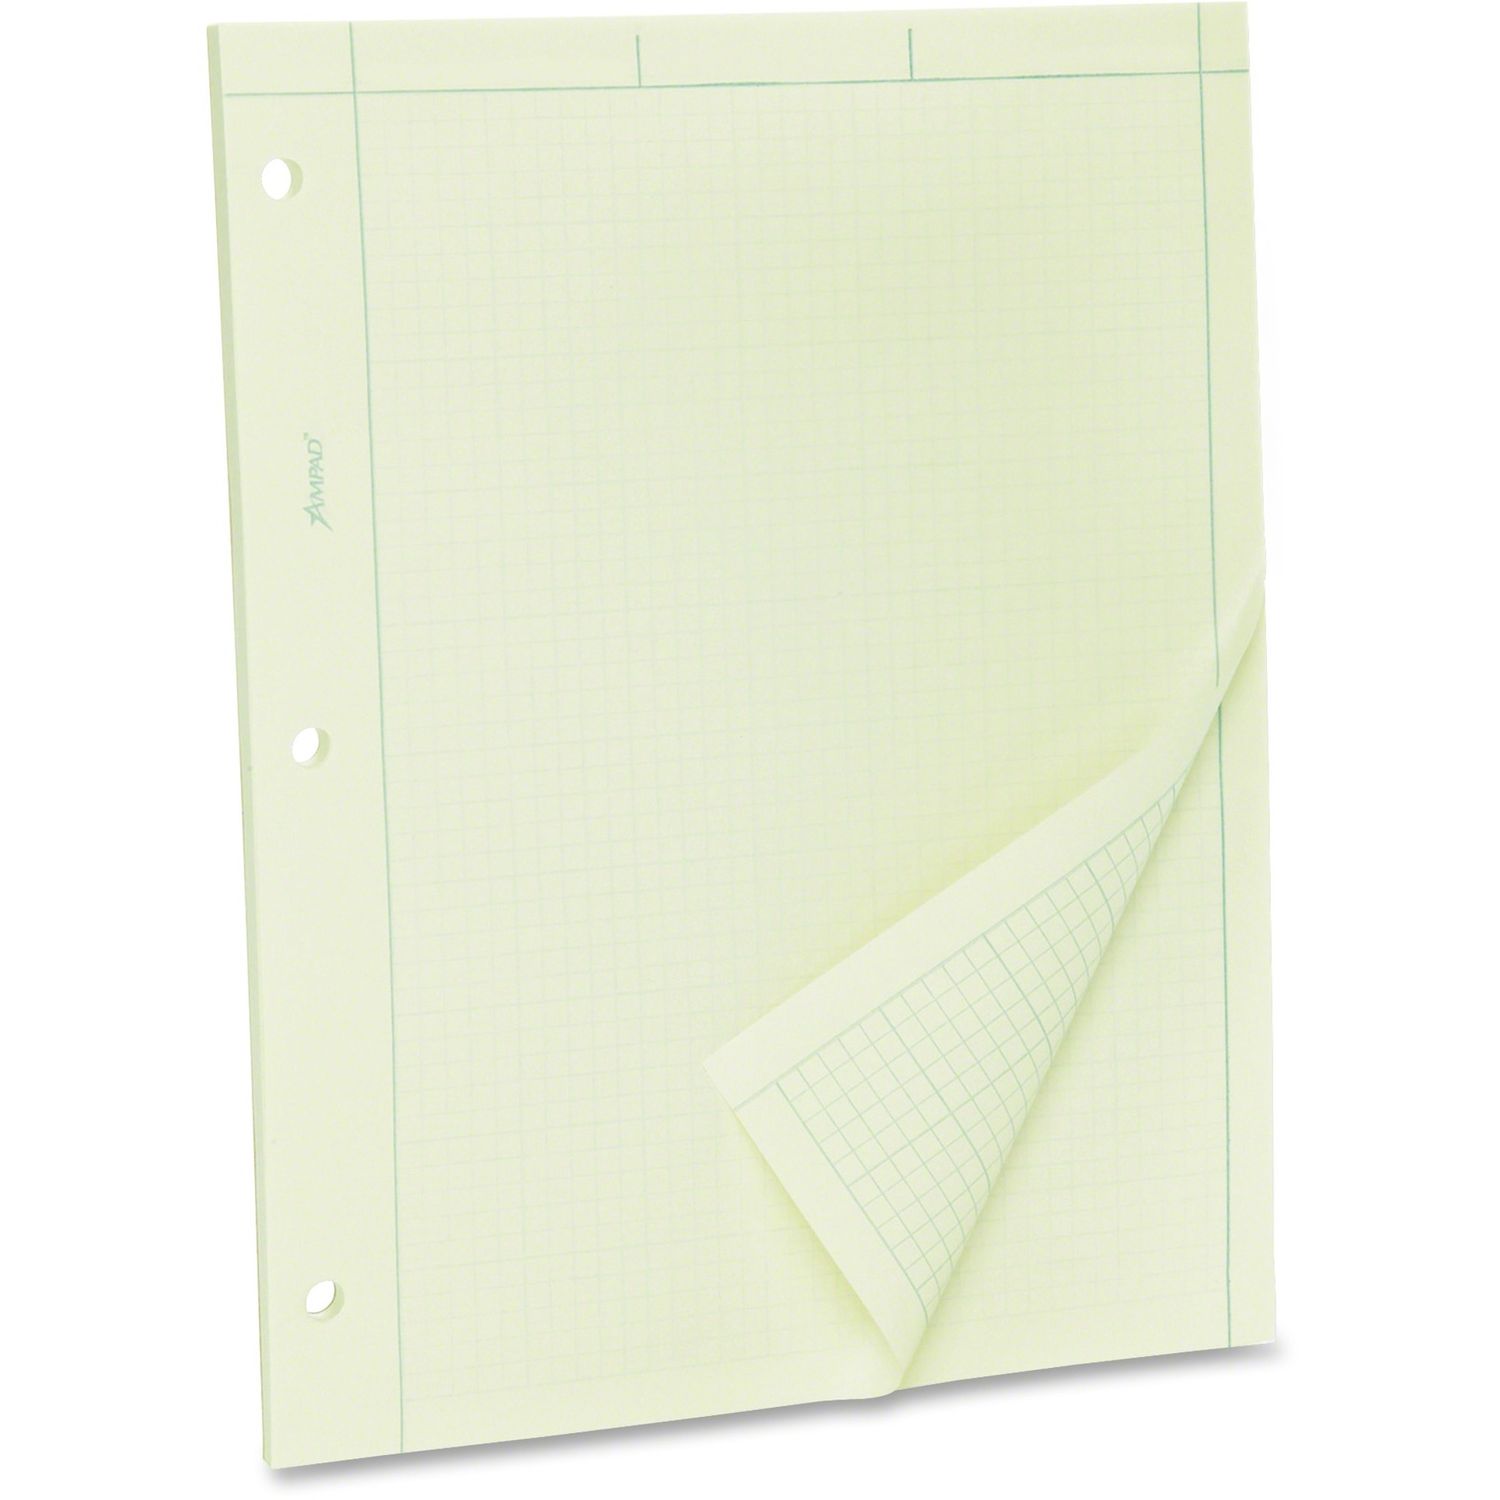 Green Tint Engineer's Quadrille Pad - Letter 100 Sheets, Both Side Ruling Surface, Ruled, 15 lb Basis Weight, 8 1/2" x 11", Green Tint Paper, Hole-punched, 100 / Pad